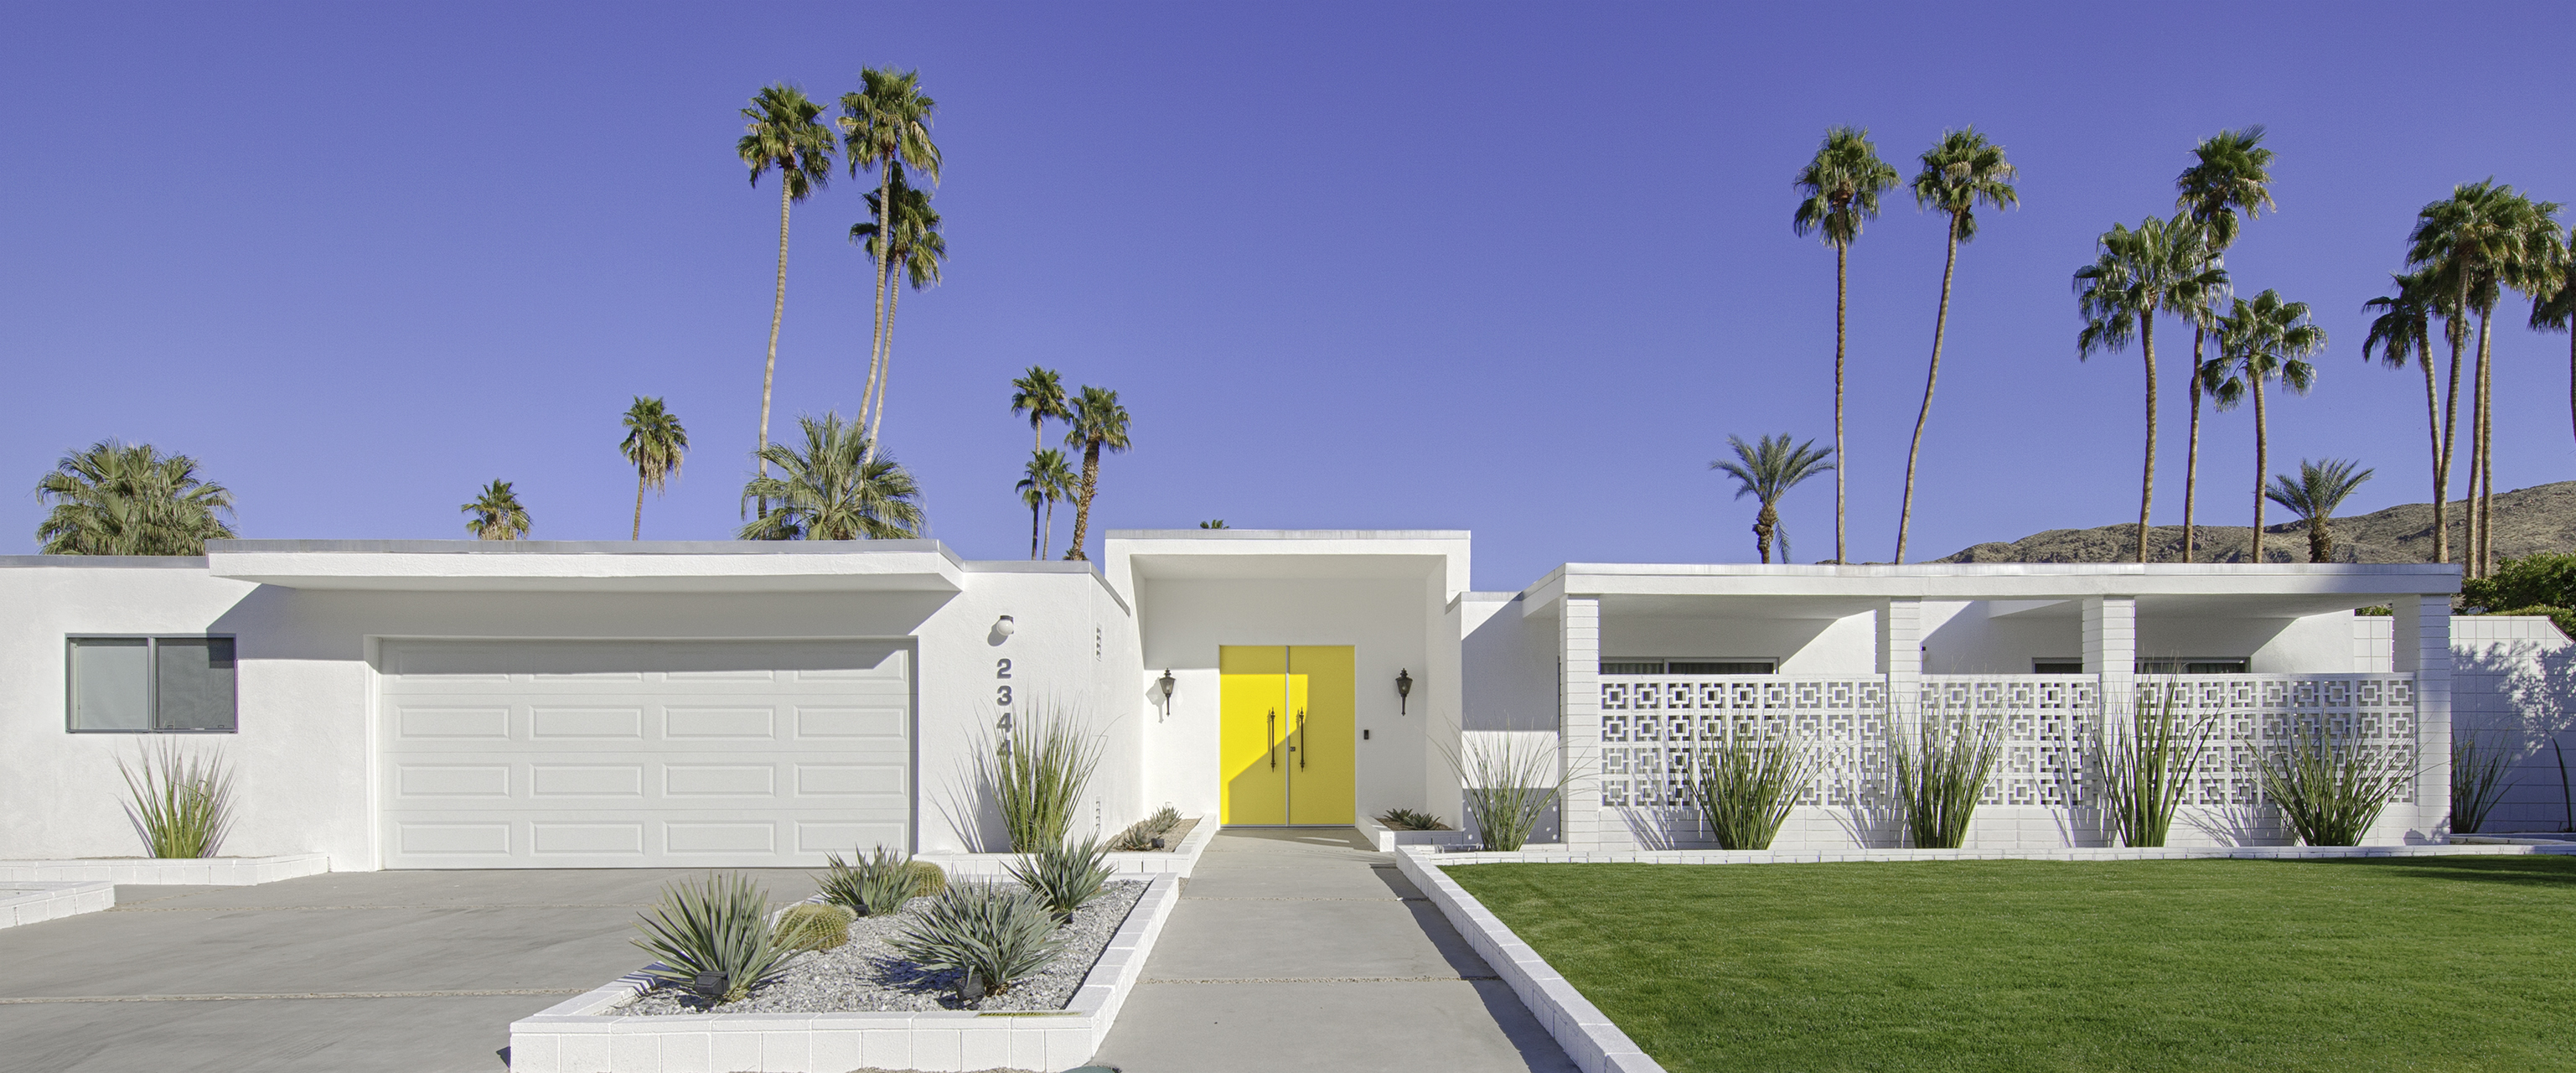 palm springs real estate, coachella valley real estate, best views in the coachella valley